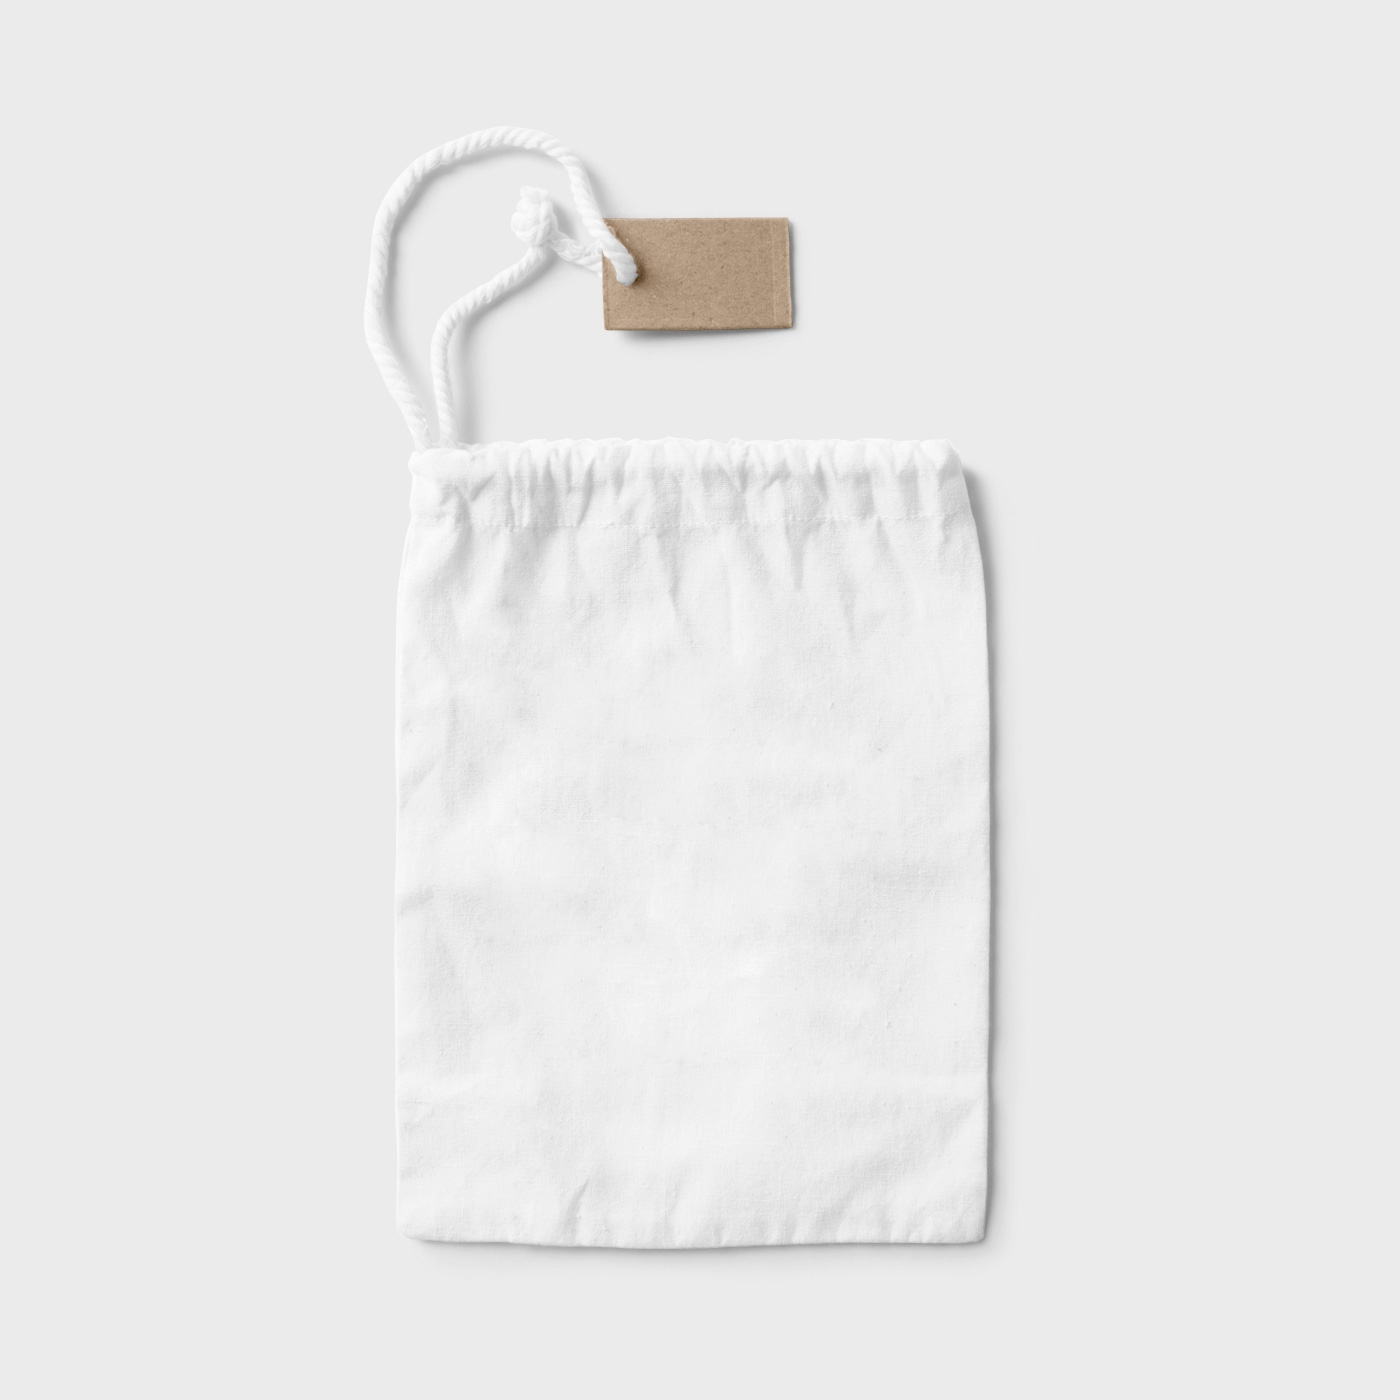 Top View of a Canvas Bag Mockup FREE PSD